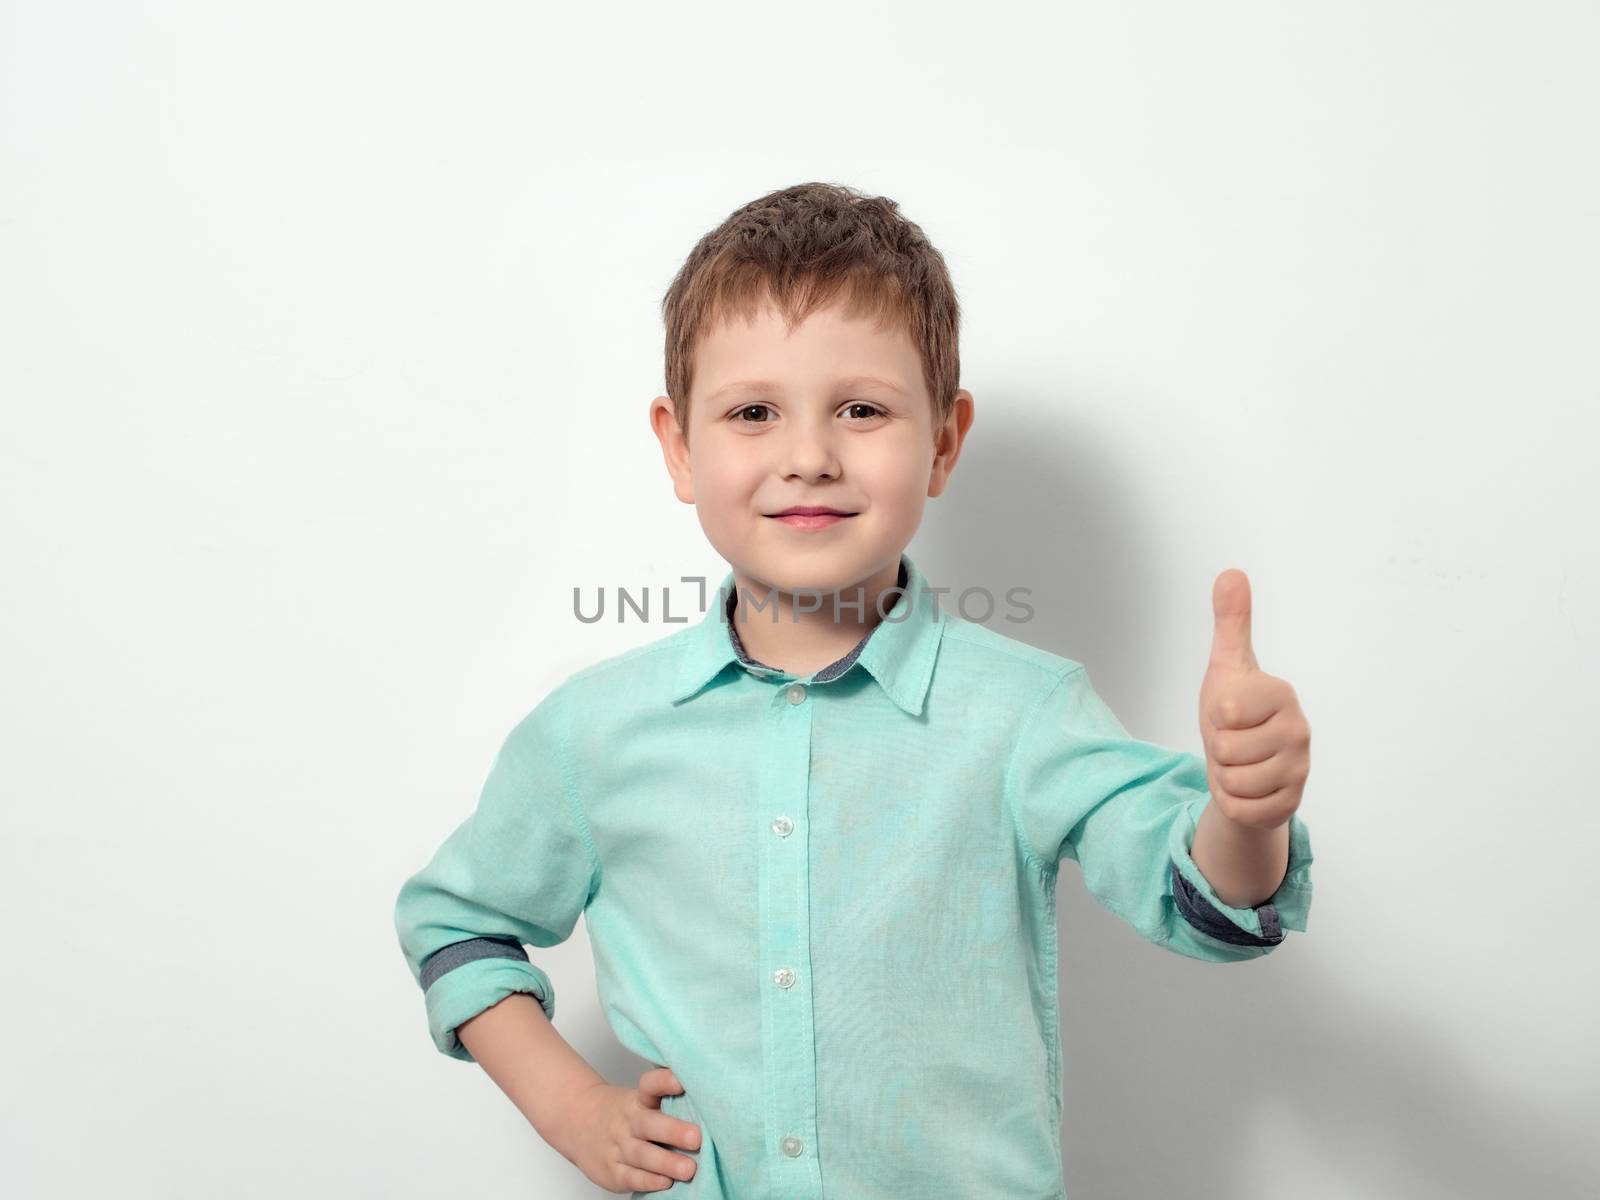 Four-year-old boy smiles and shows thumb up. Happy child in blue shirt, isolated on white background.